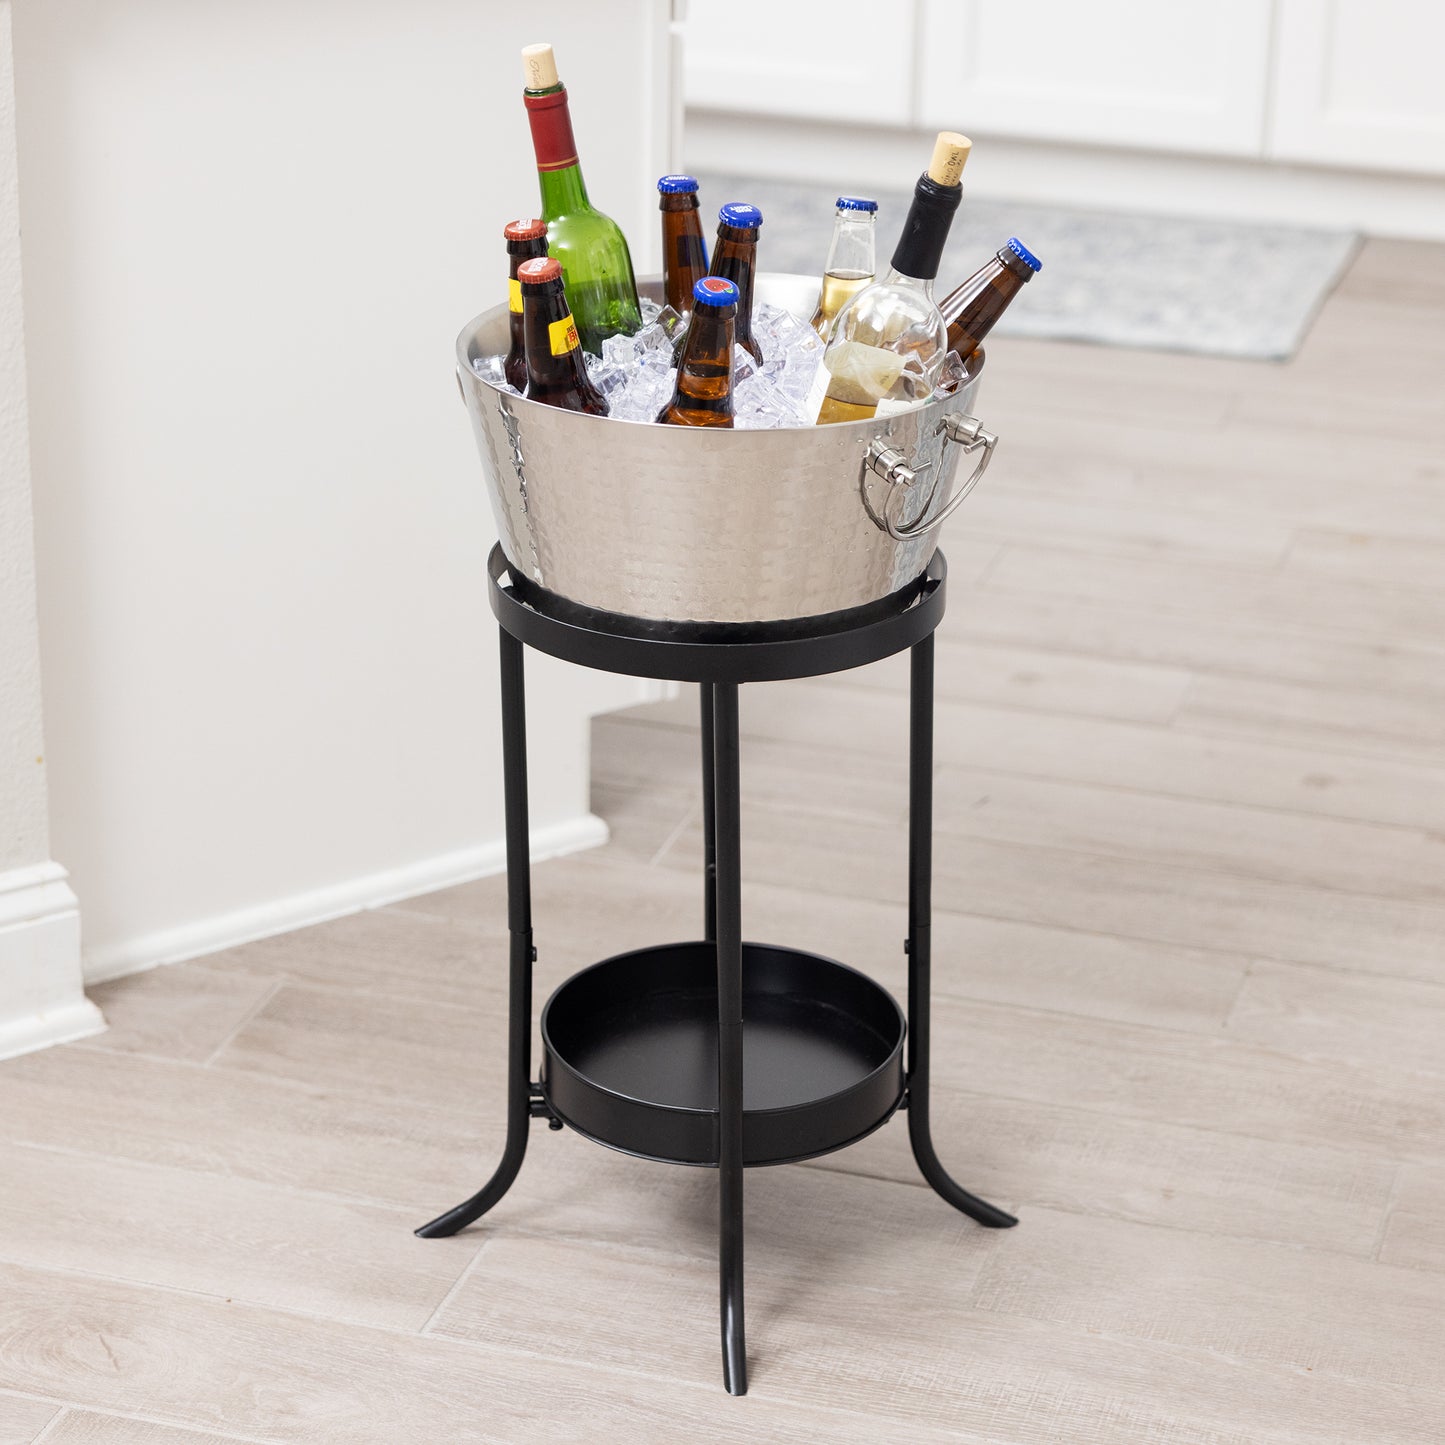 Personalized Insulated Beverage Bucket with Floor Stand - BREKX Hammered Anchored with Stand